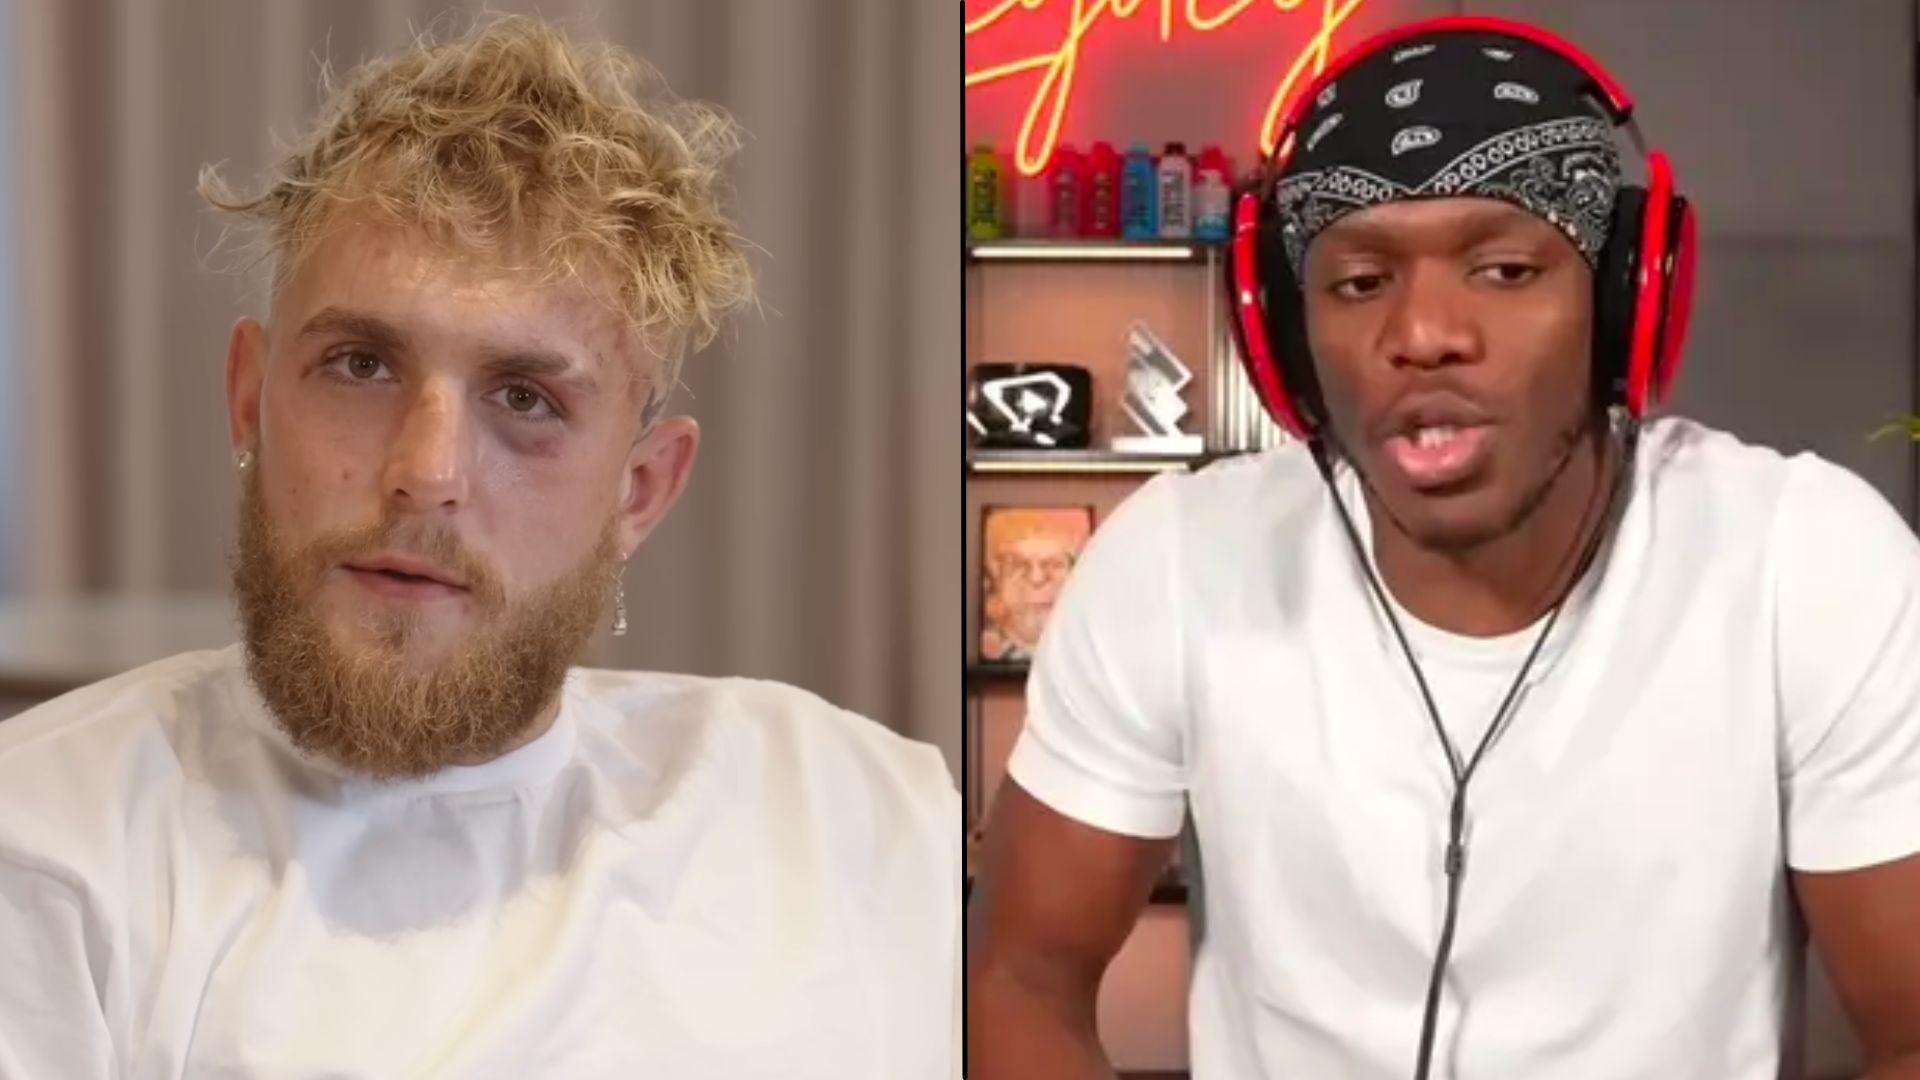 Jake Paul and KSI side-by-side in white shirts talking to camera